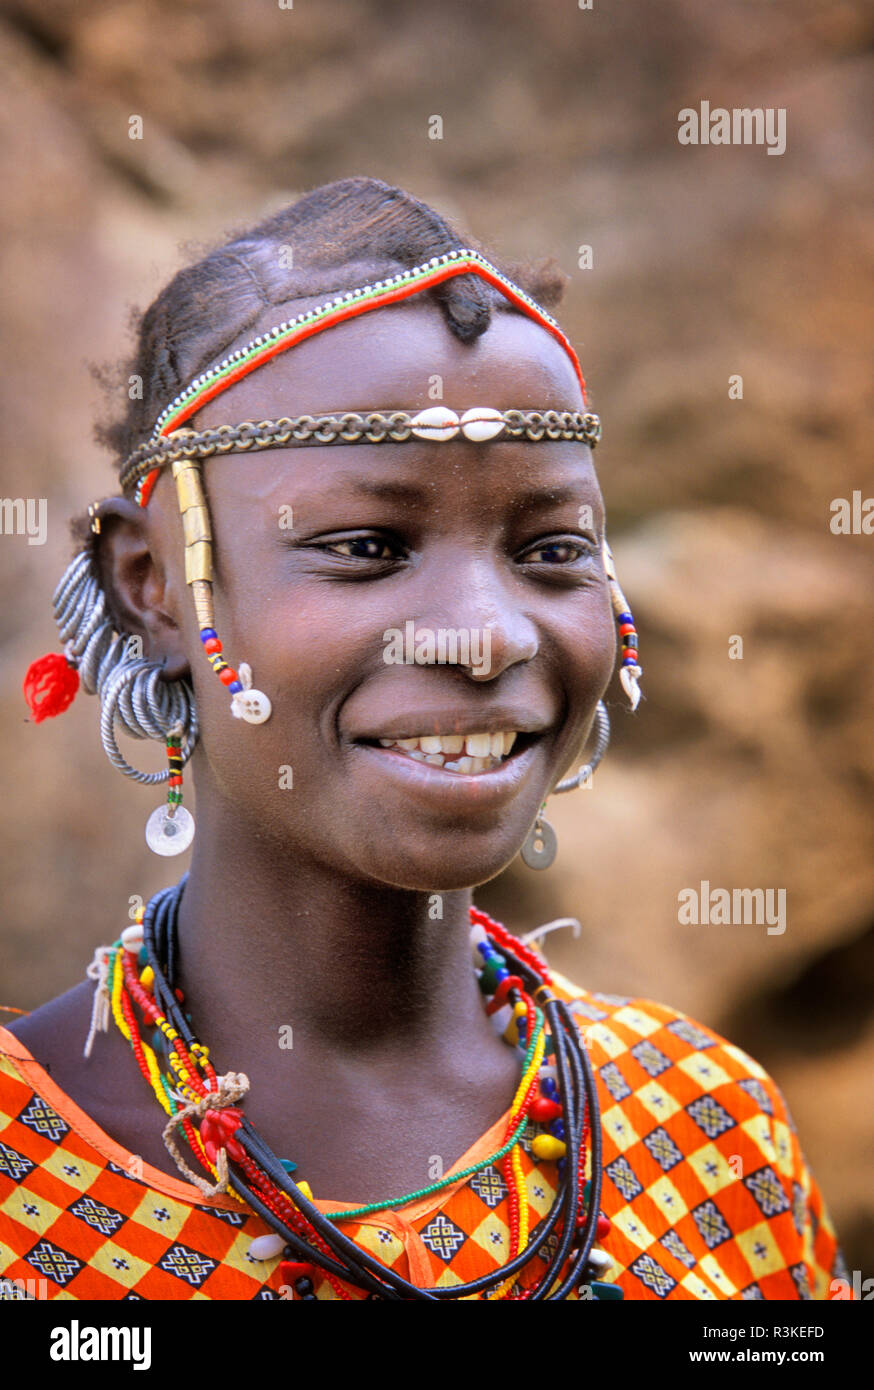 A Bedik girl wearing traditional beadwork, necklaces, and earrings in the village of Iwol, Senegal, Africa. Stock Photo